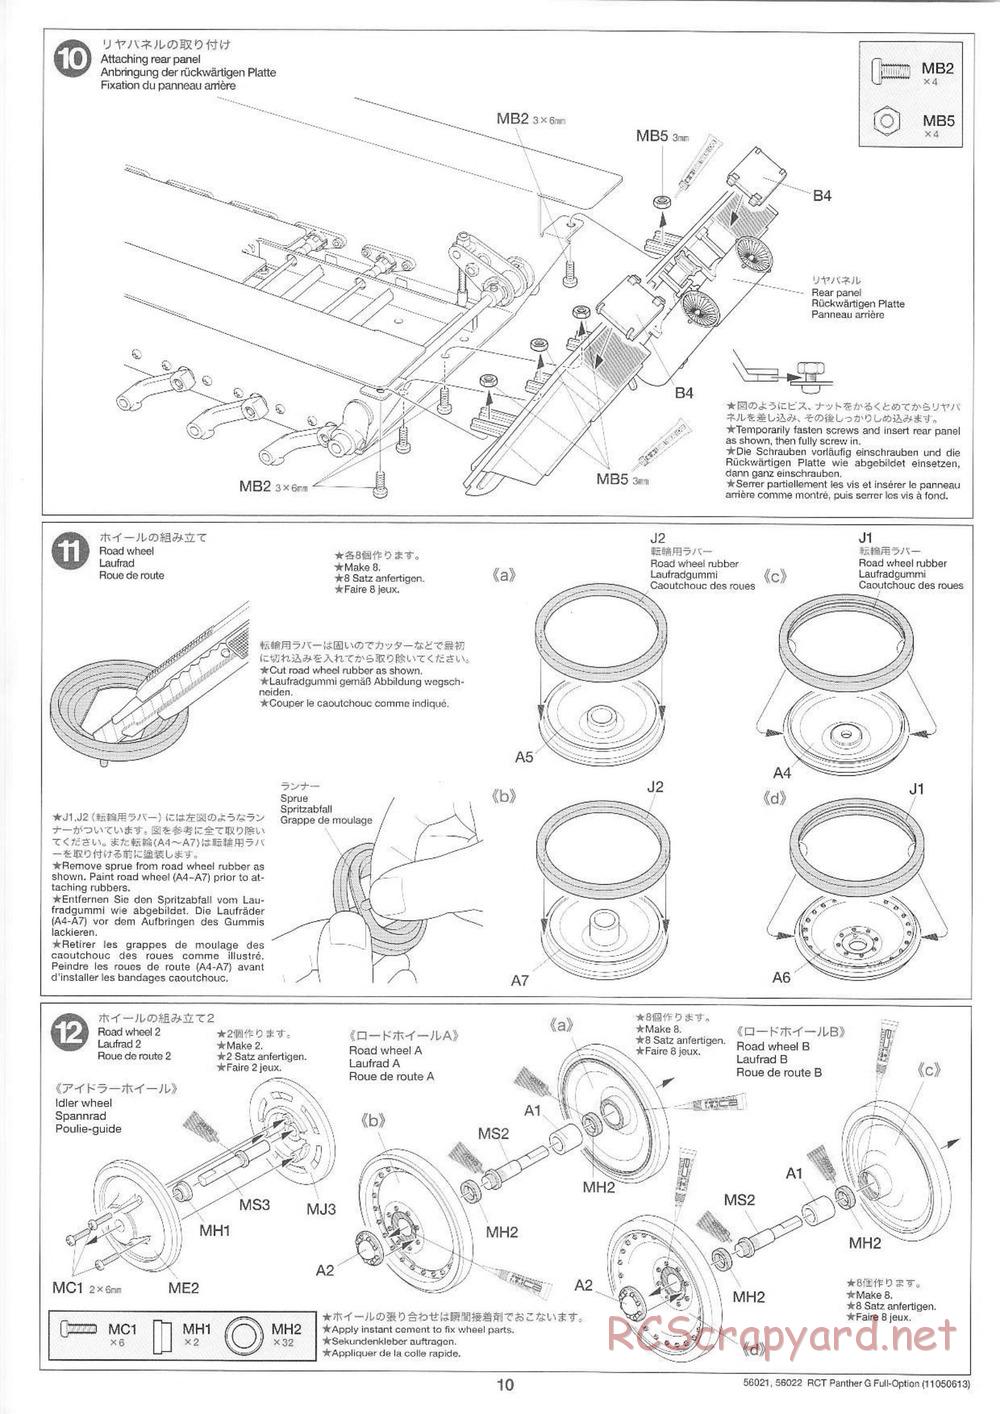 Tamiya - Panther Type G - 1/16 Scale Chassis - Manual - Page 10